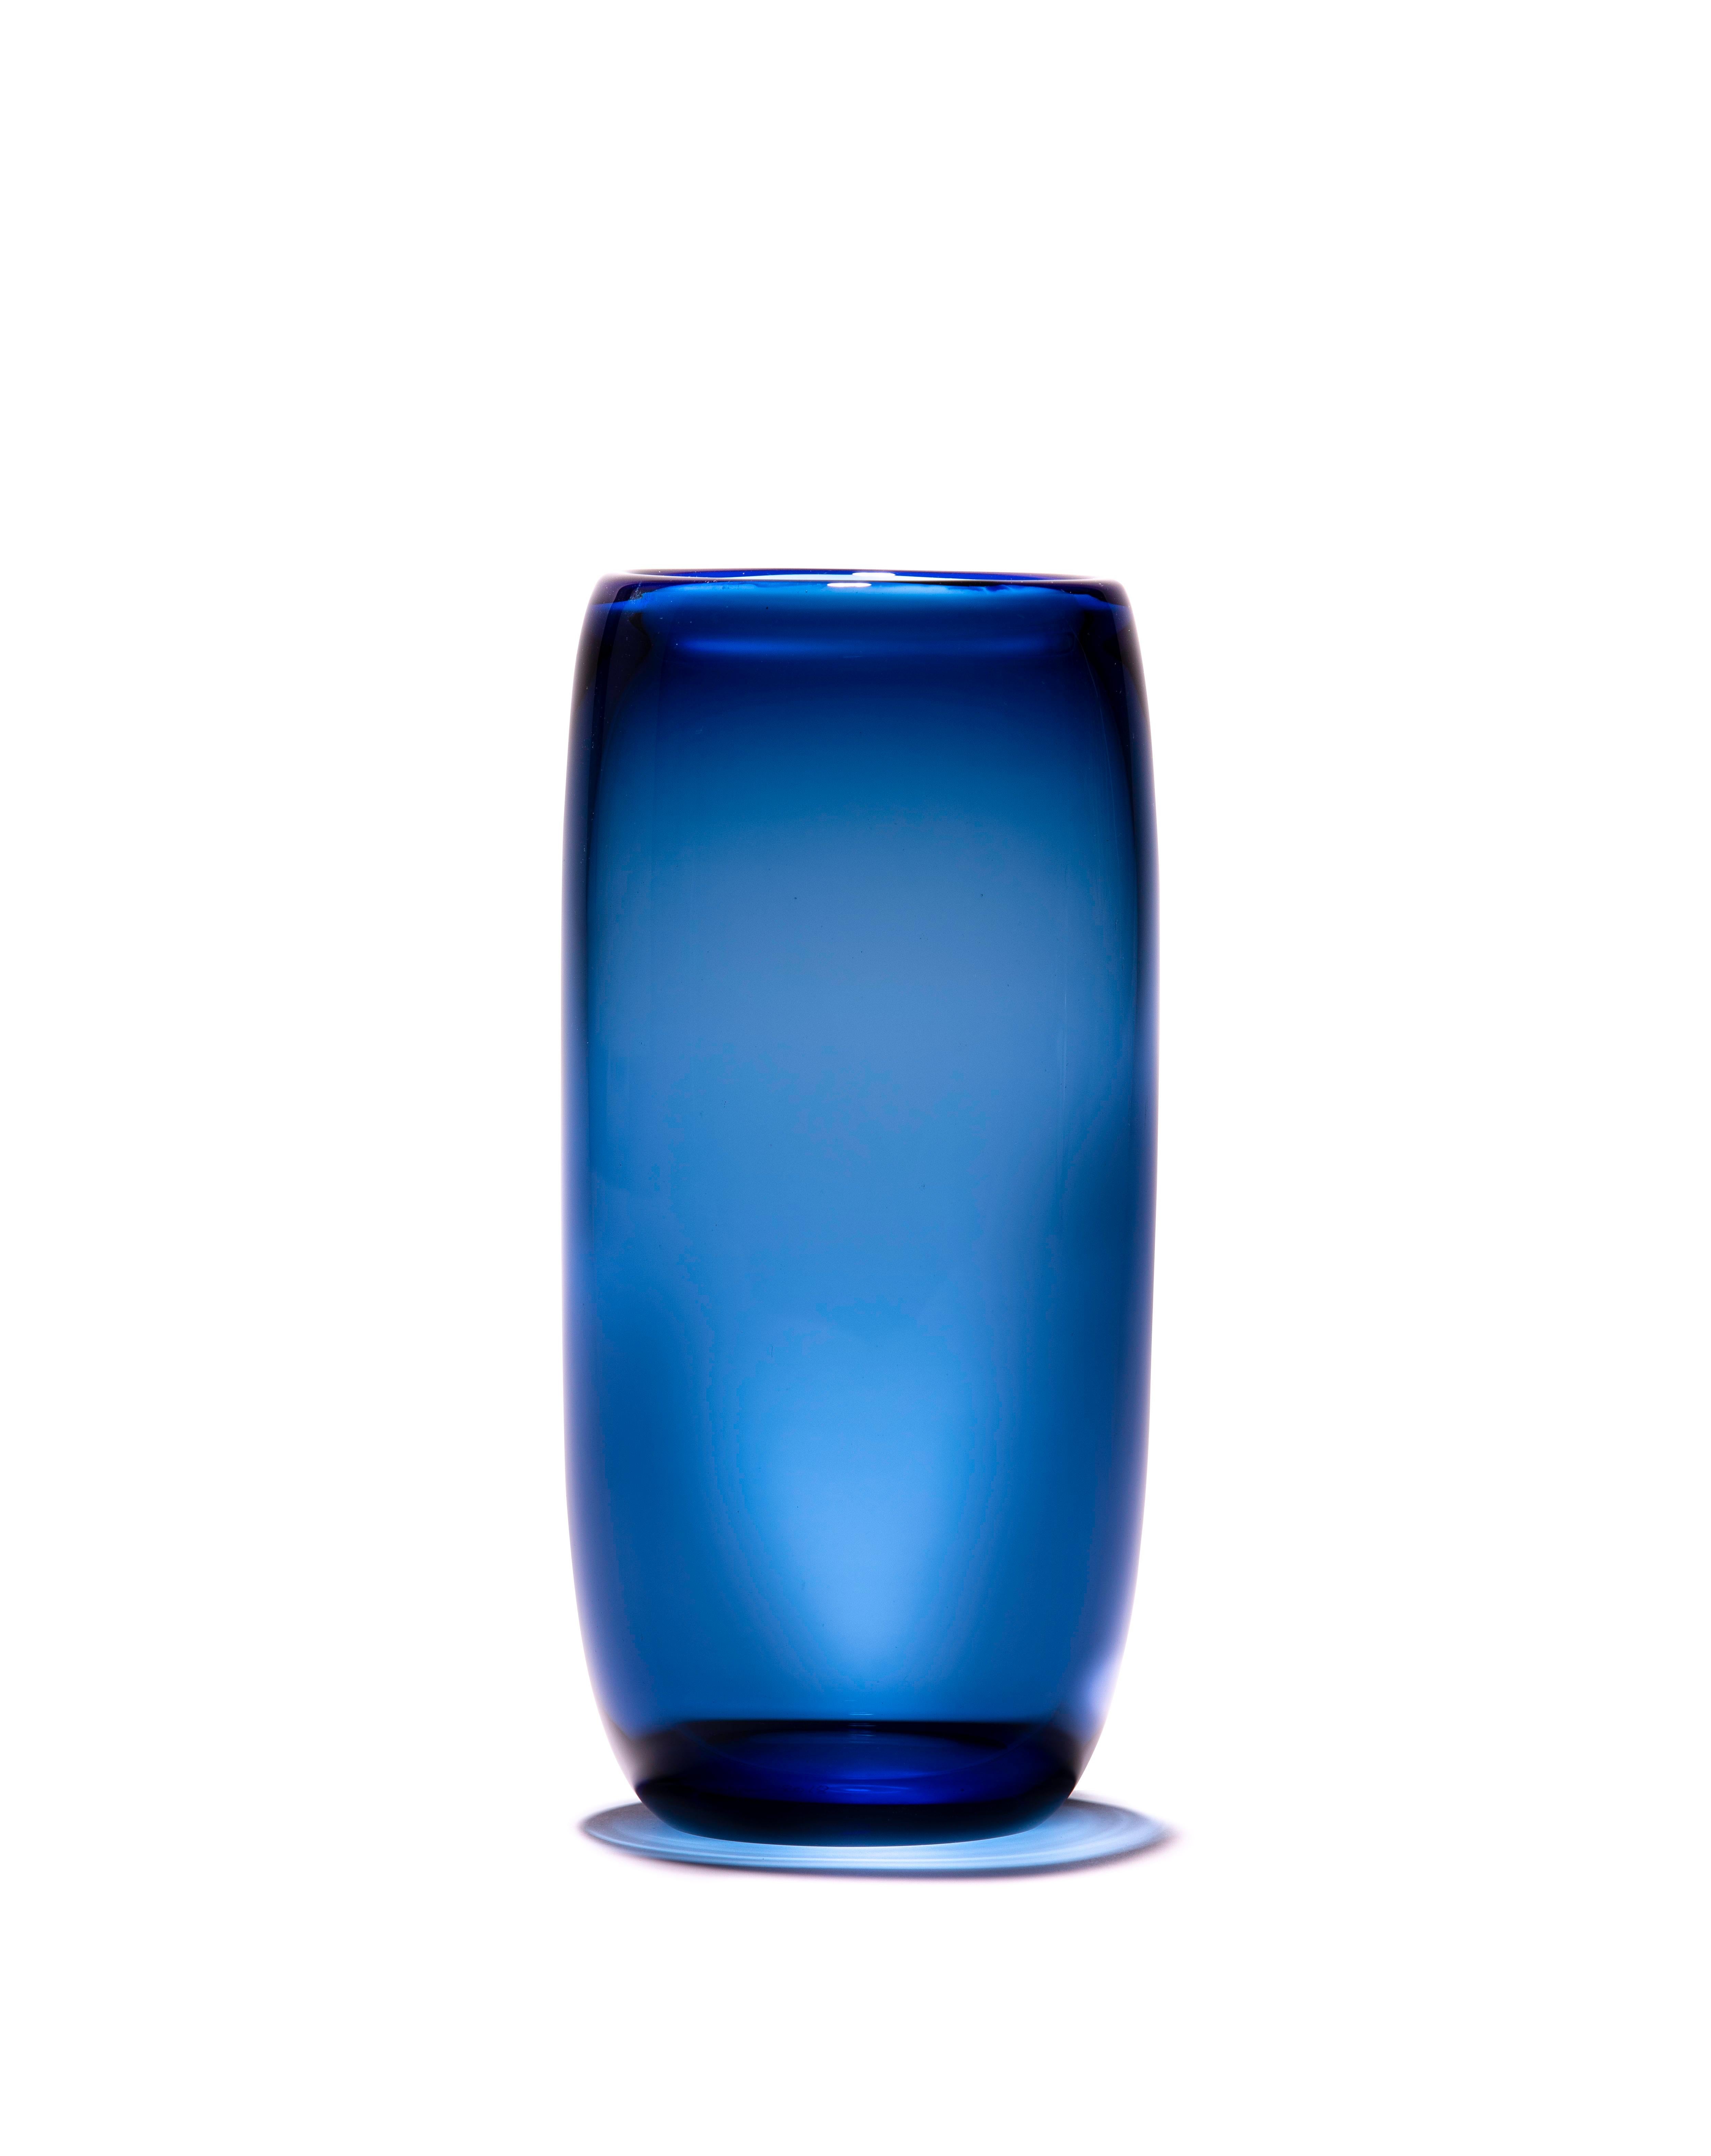 Unique Harvest Graal Blue and Black Glass Vase by Tiina Sarapu 7